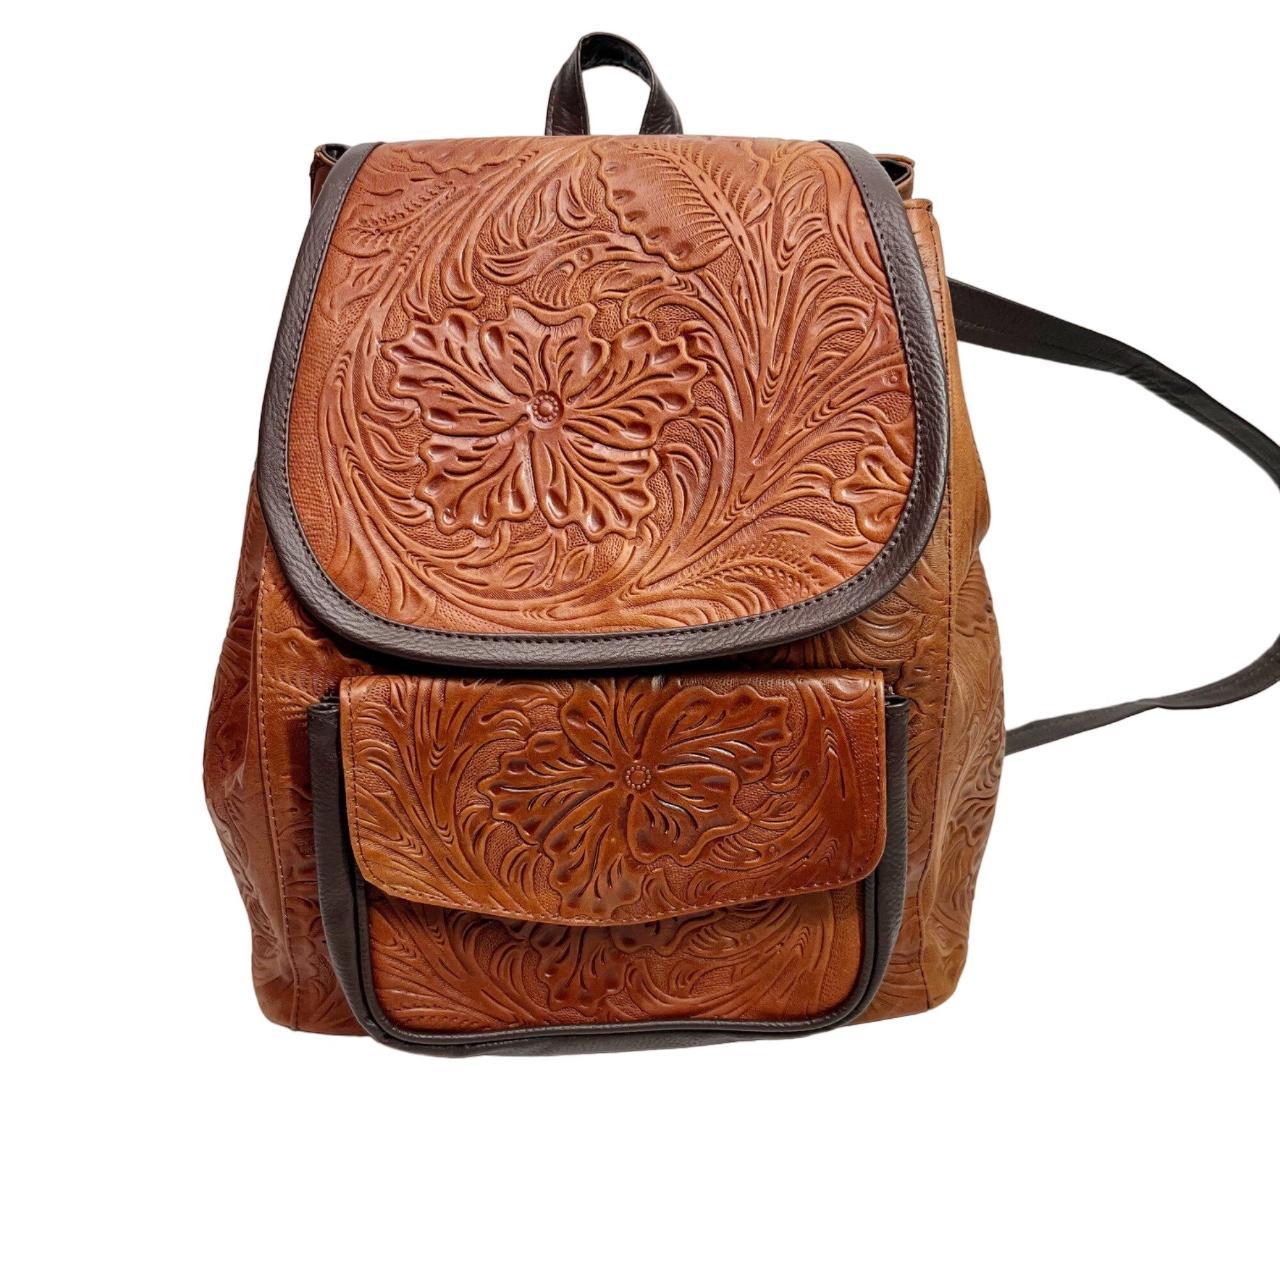 Leather Crossbody Purse - Amarillo - Supple leather Cowhide/Tooled/Fringe -  Ranch Hand Store